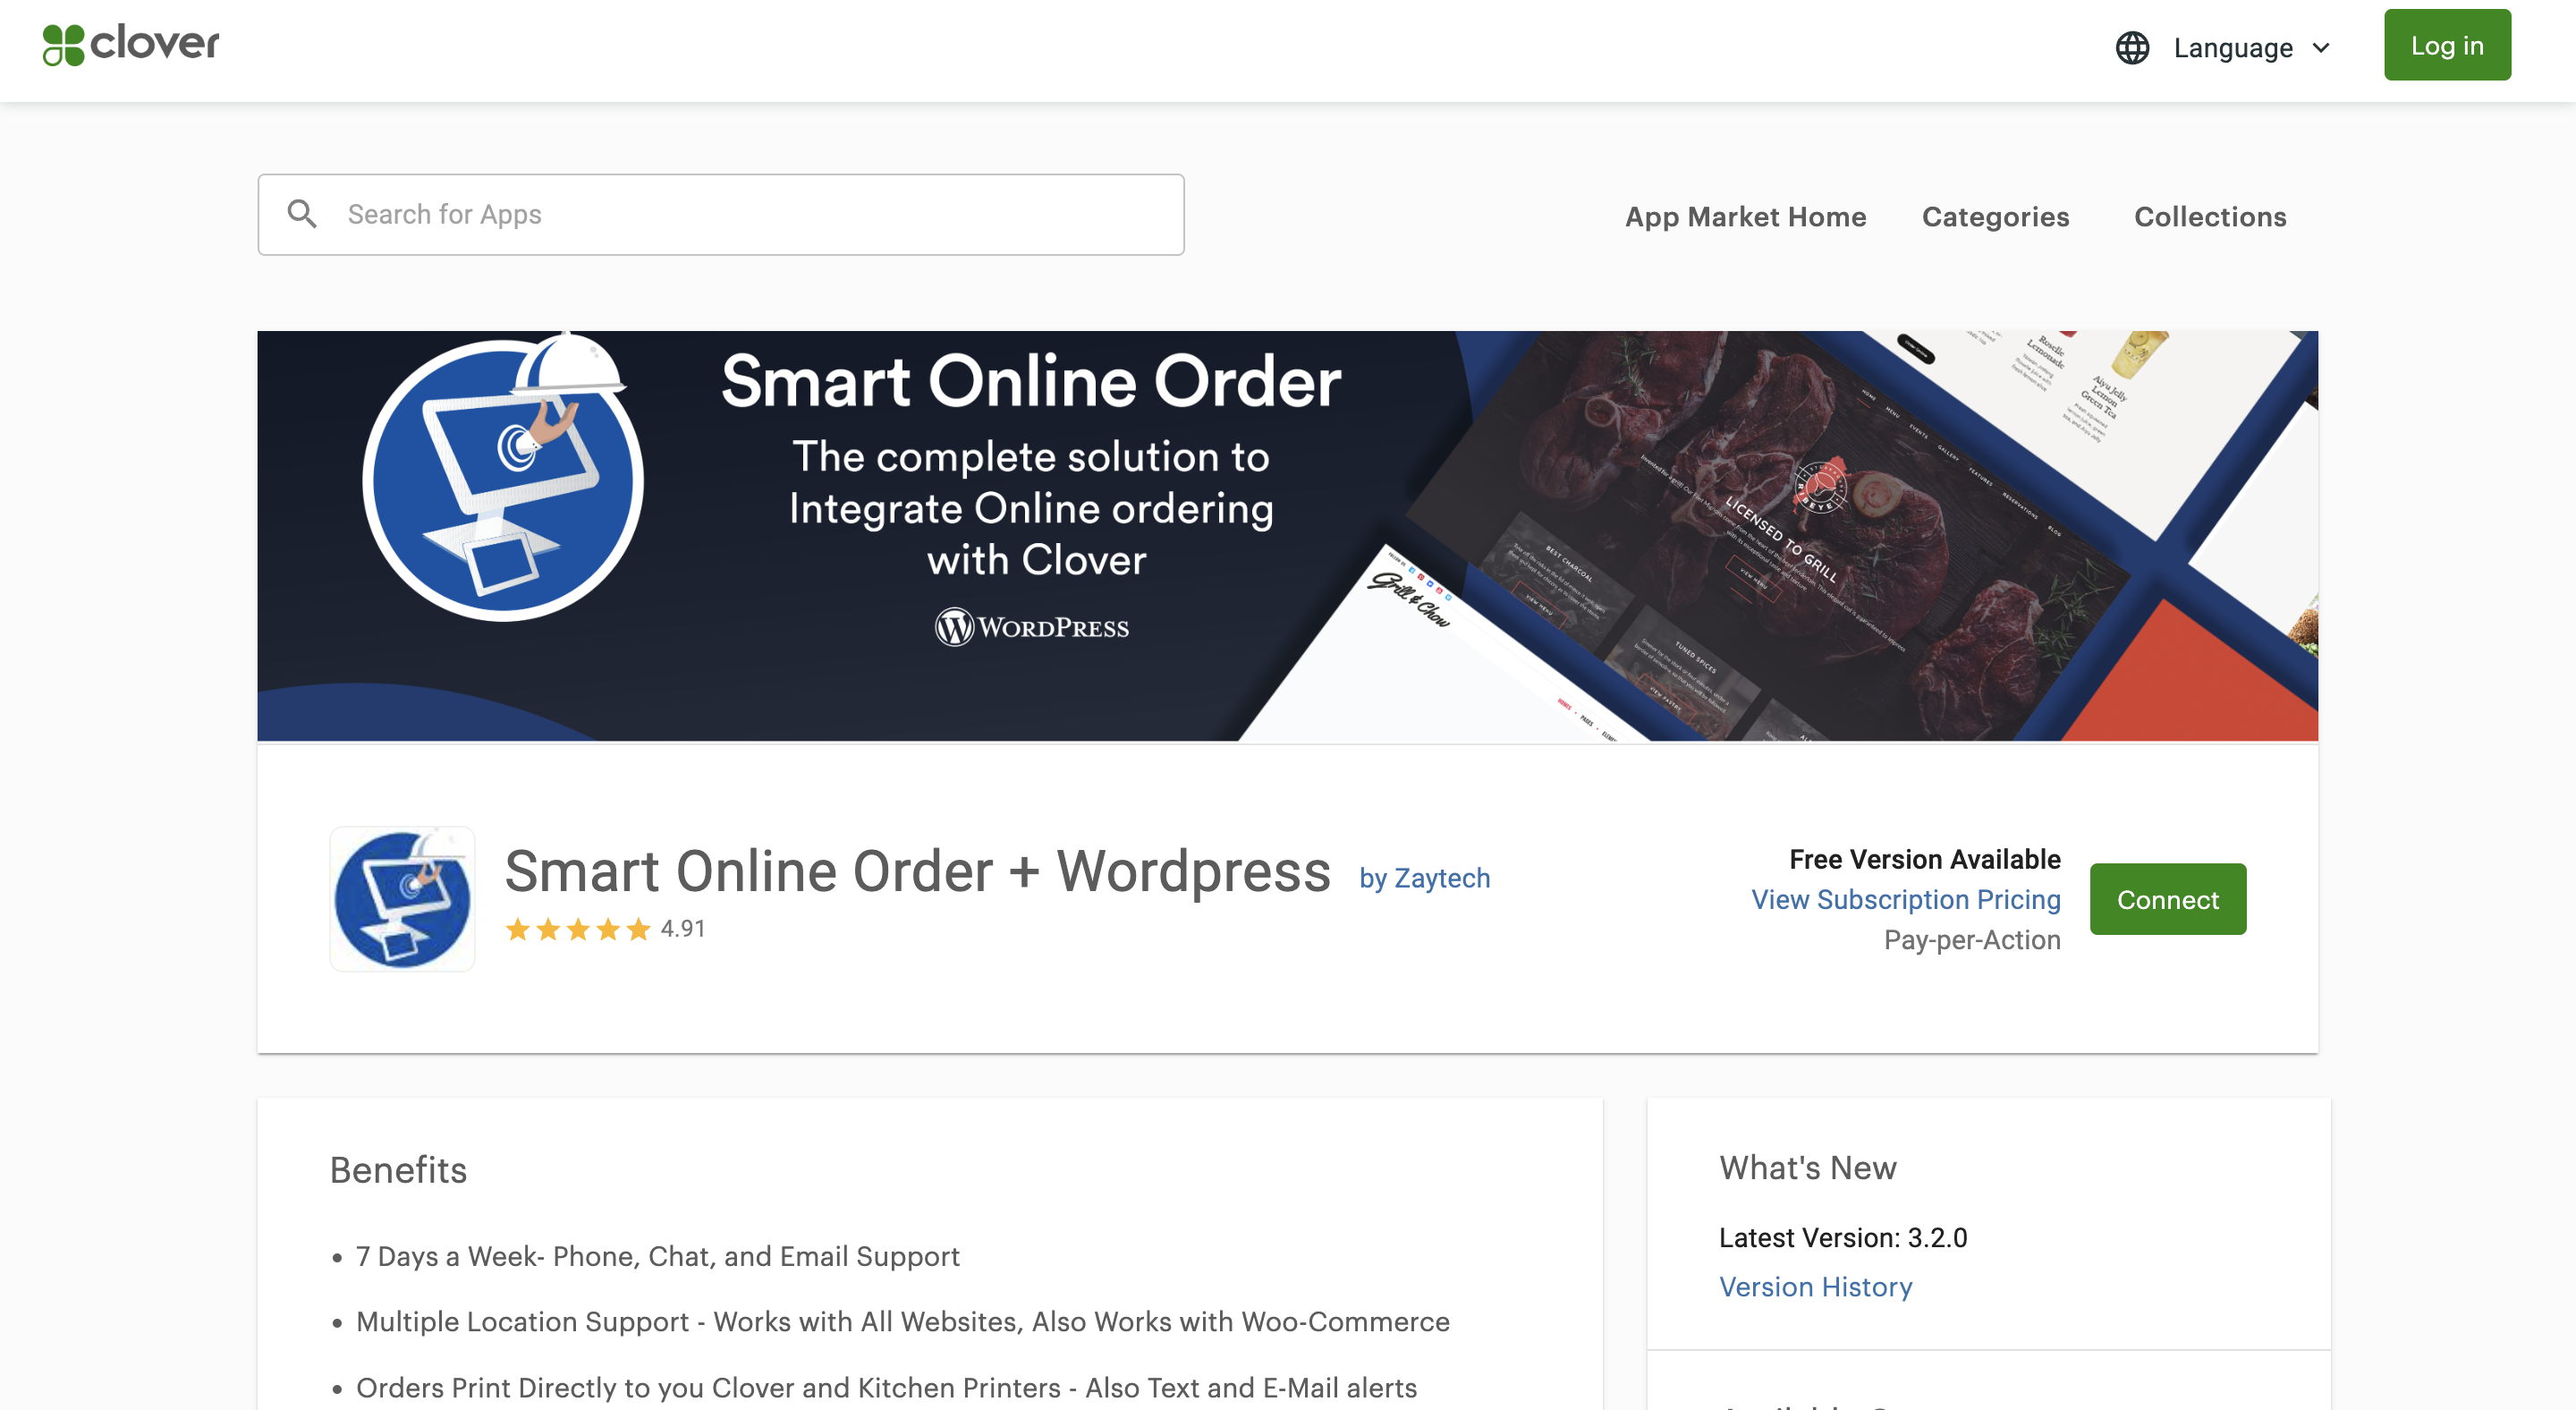 How does the Smart Online Order app work and what are its benefits for business owners? 